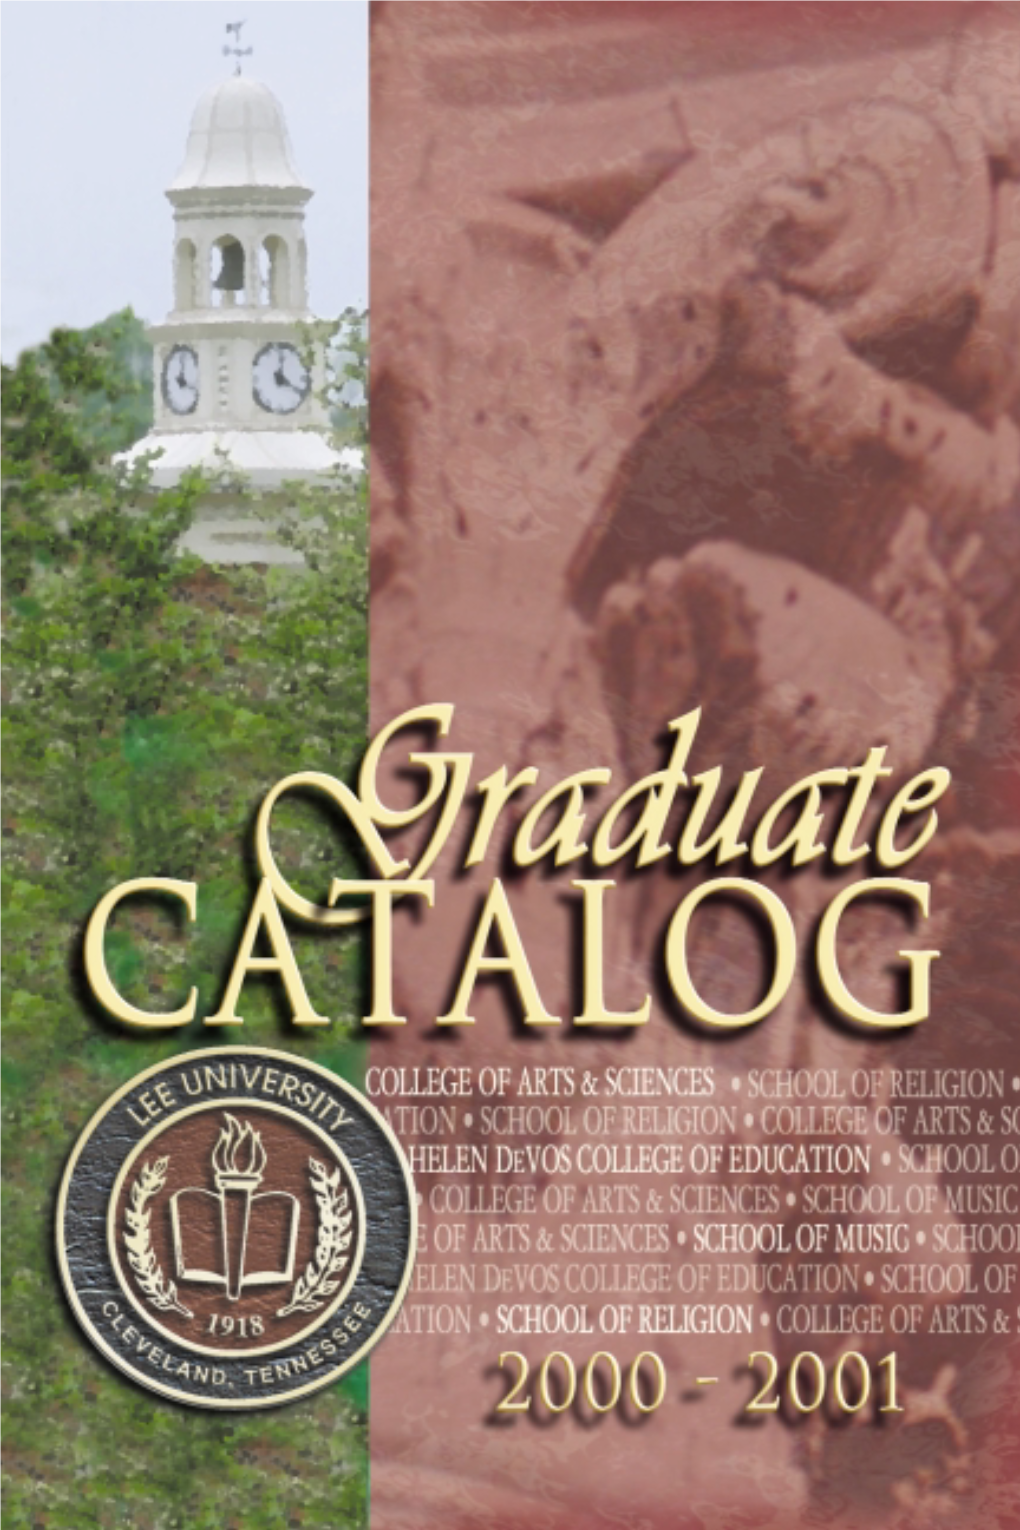 Graduate Catalog Is Published Annually by Lee University at Cleveland, Tennessee